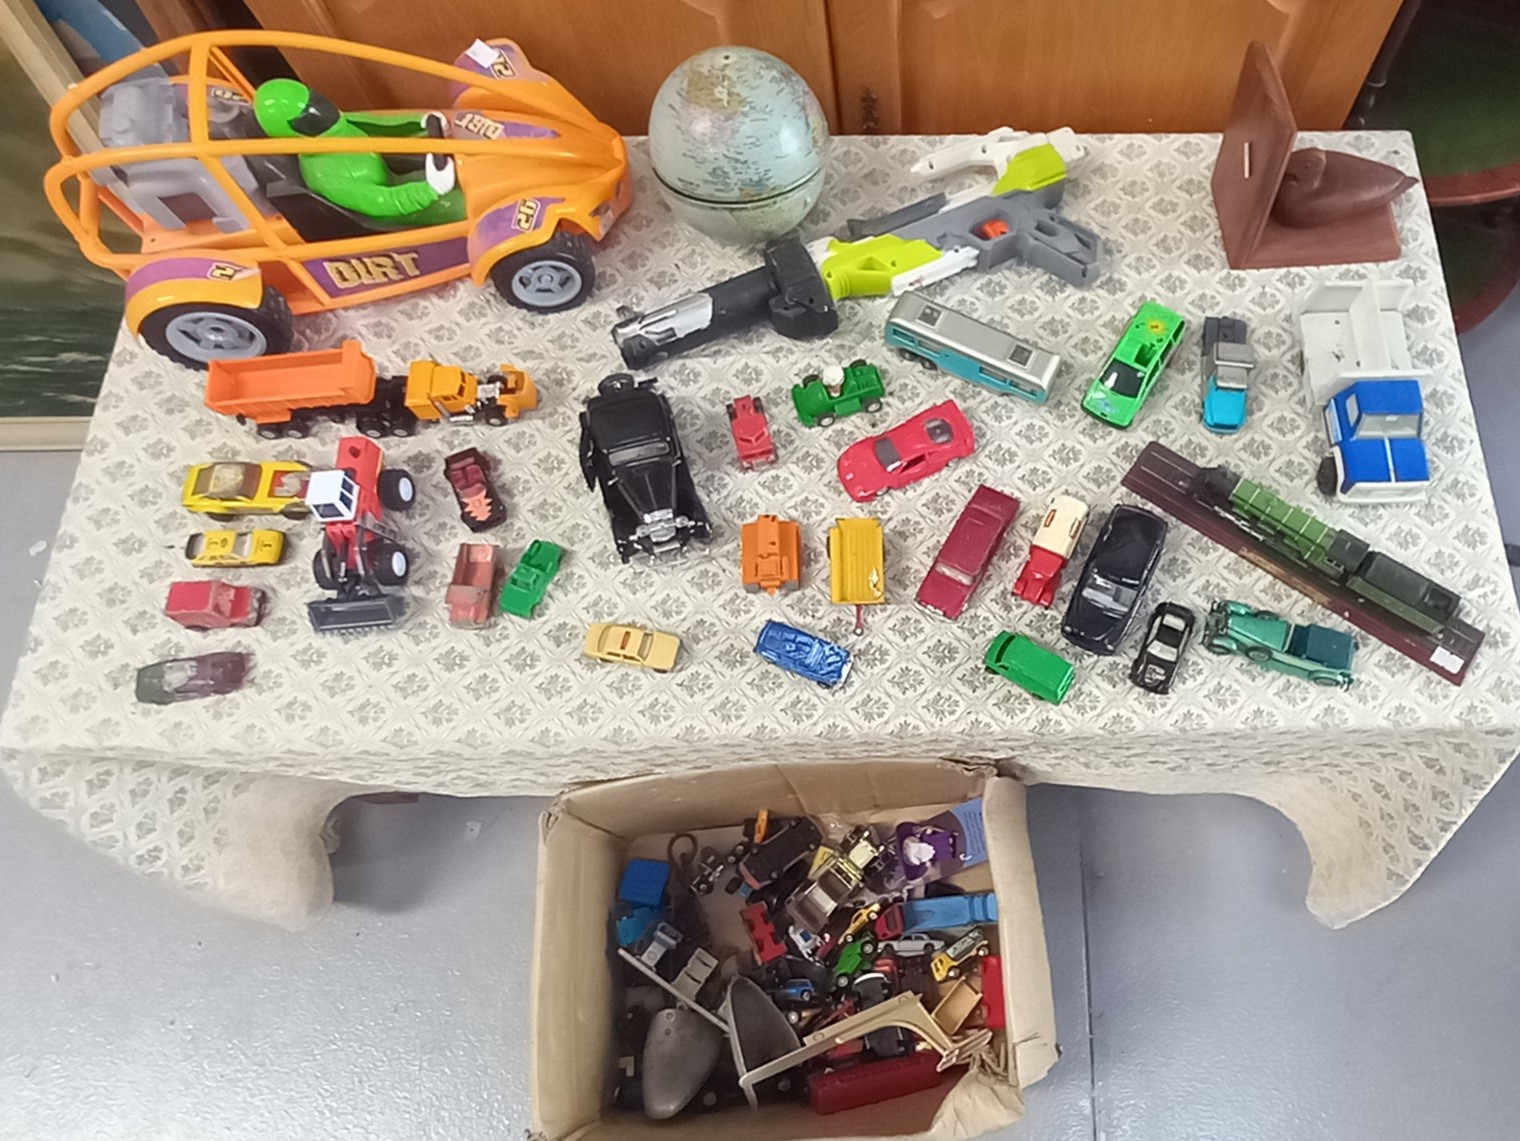 Corgi, Matchbox and other cars and toys in one box.